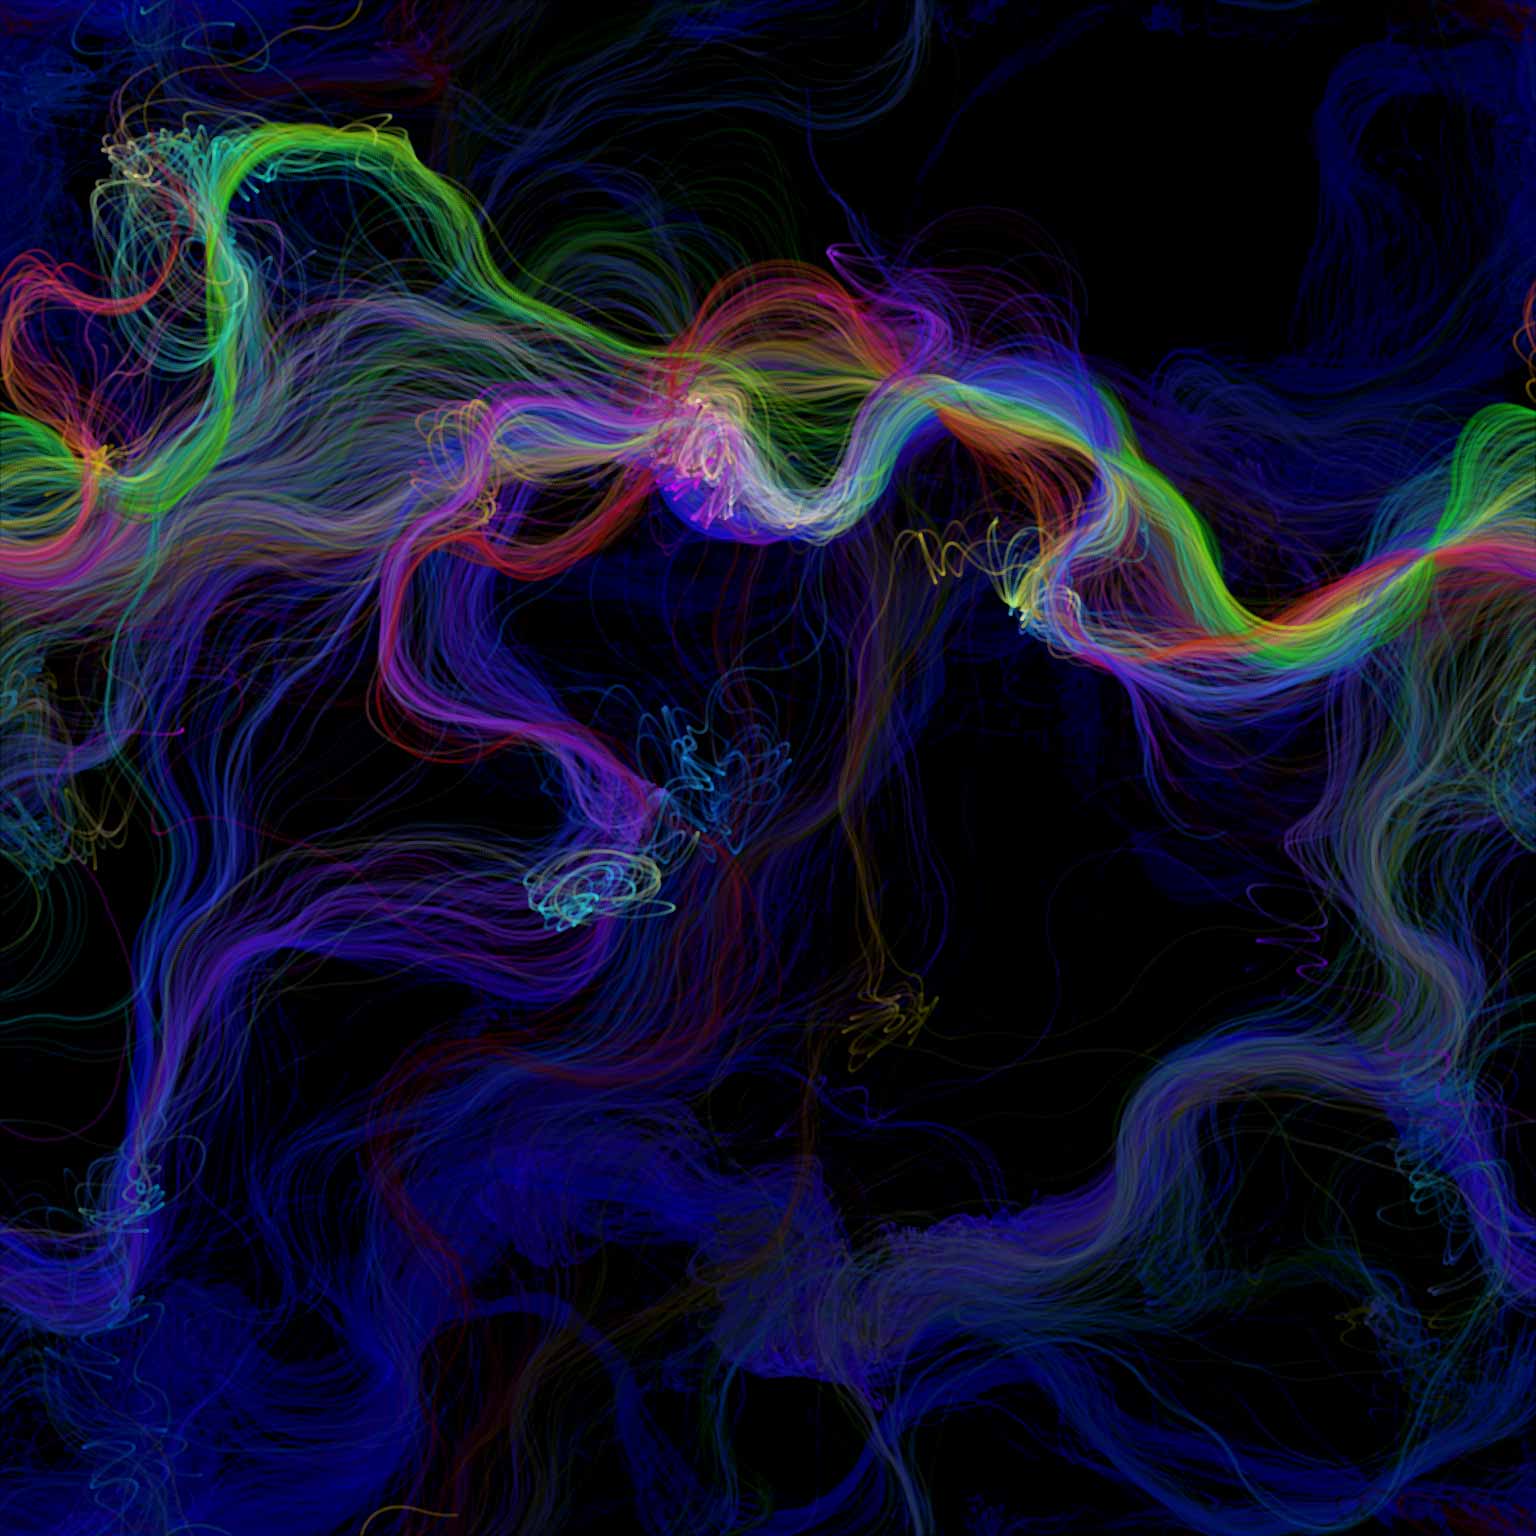 Particles with flowfields controlled by color, Processing, Sept. 20, 2016